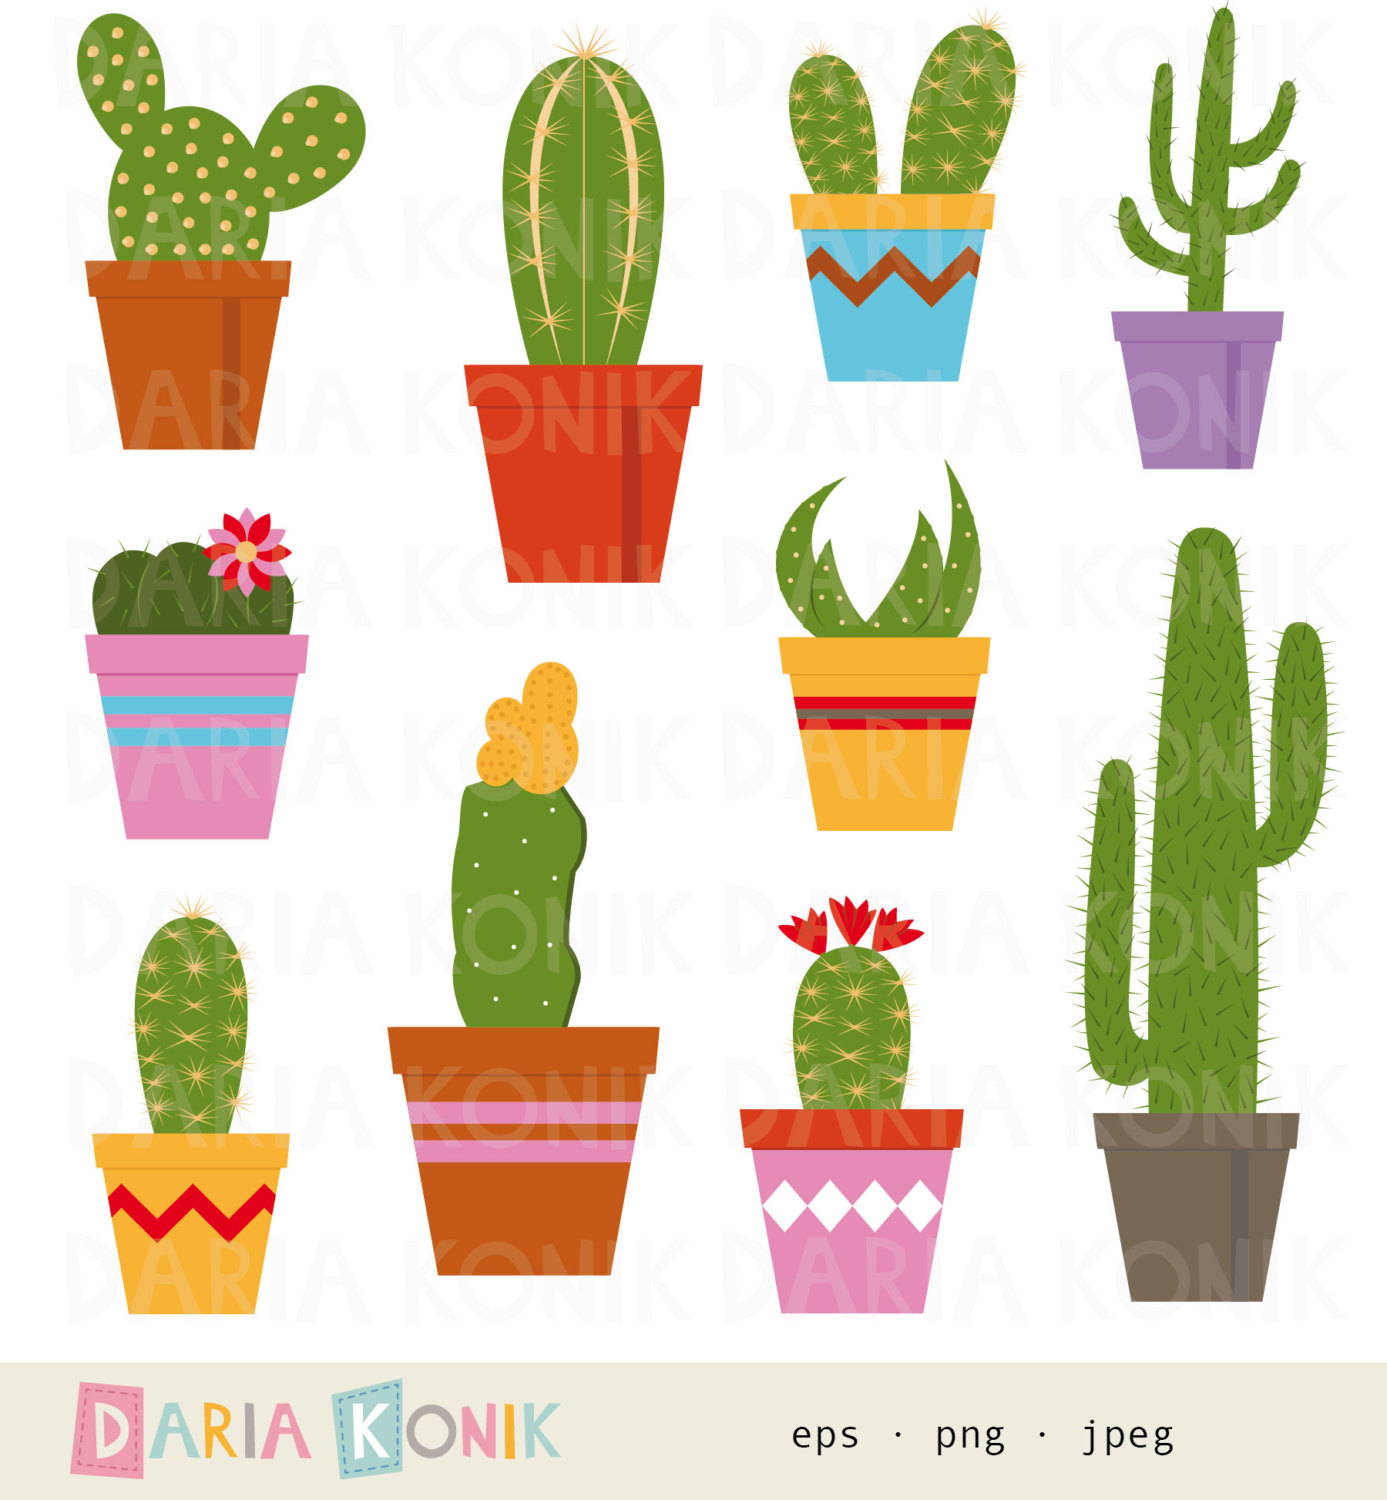 Potted cactus clipart 9 » Clipart Station.